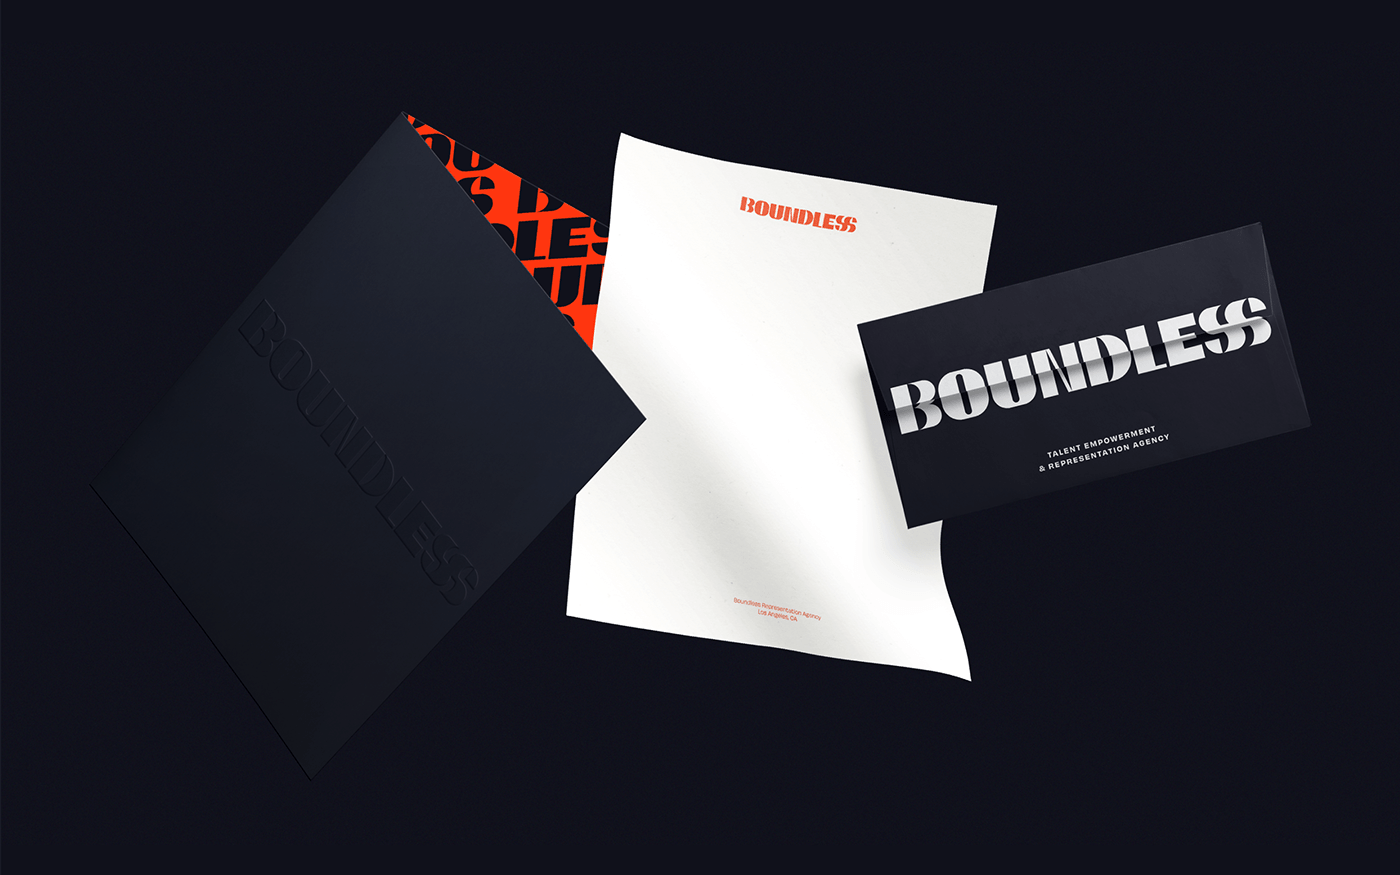 Folder with embossed logo and bright orange pattern on the inside, branded letterhead and envelope